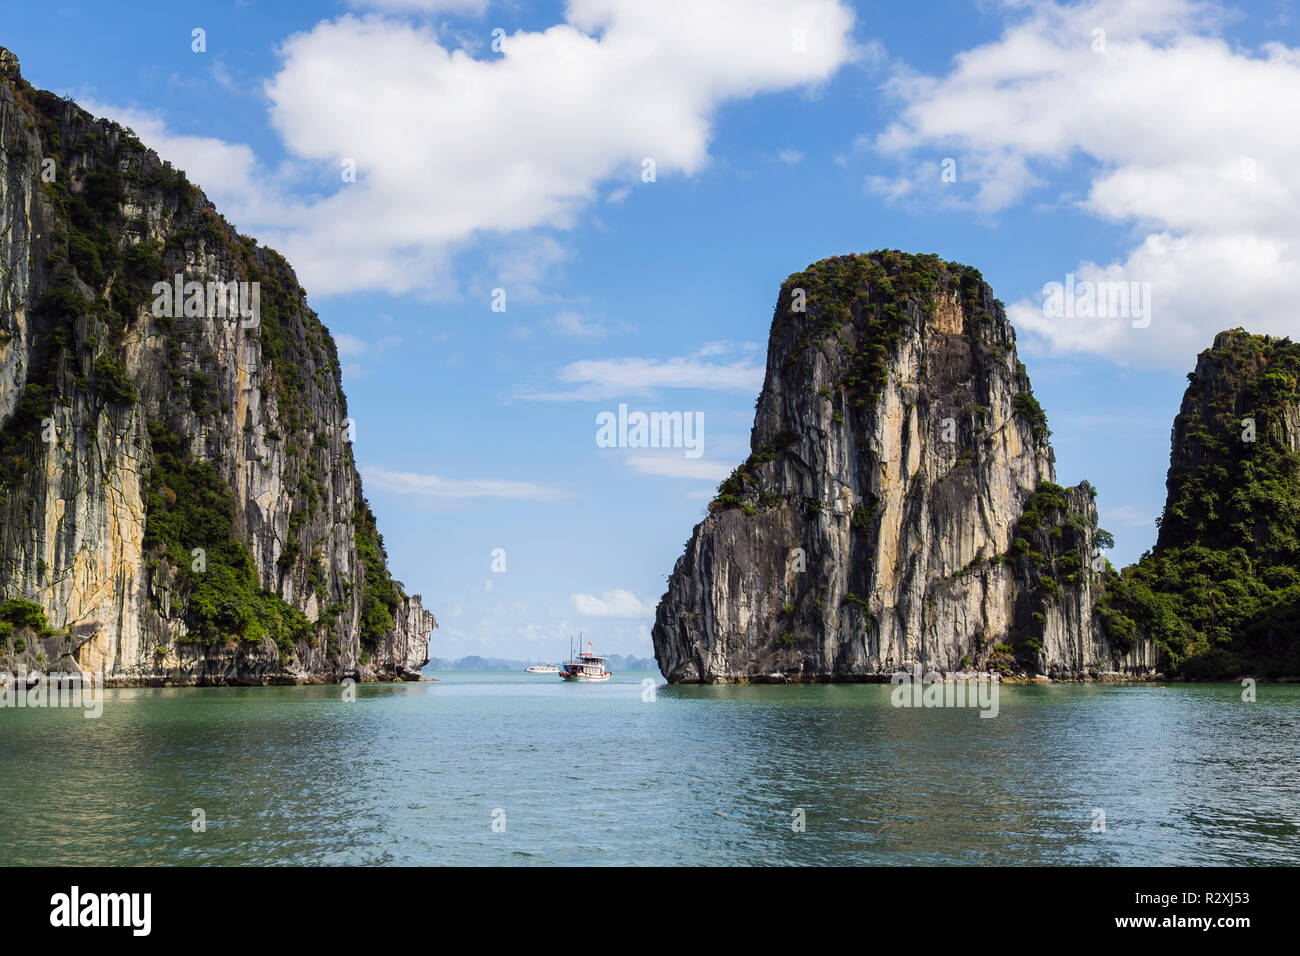 A Tourists junk boat sails between steep sided limestone rock islands in Halong Bay in South China Sea. Ha Long, Quảng Ninh, Vietnam, Asia Stock Photo